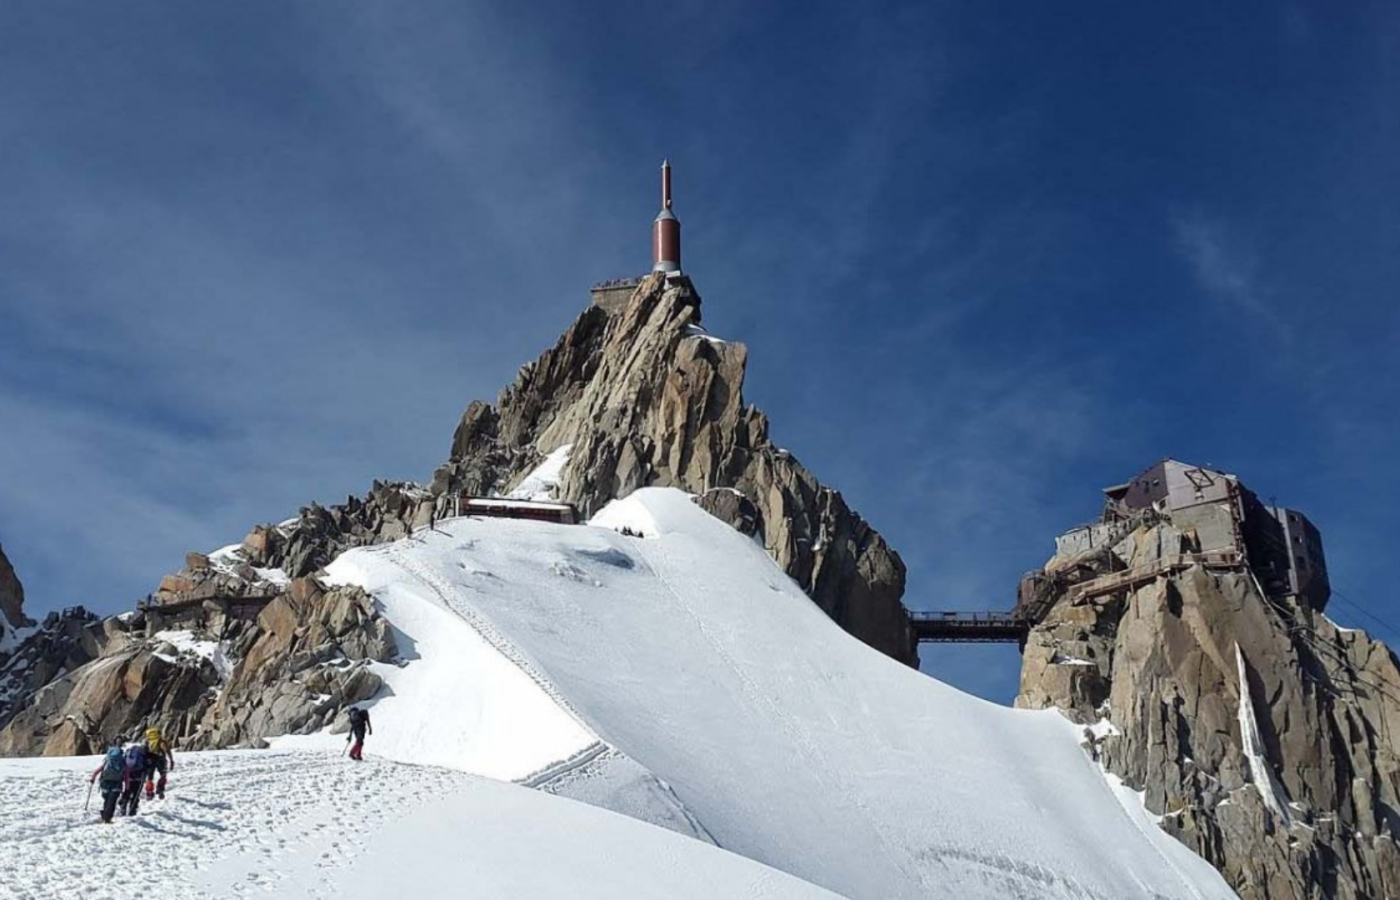 The Aiguille du Midi is a must-see in the Chamonix-Mont-Blanc Valley. From the centre of Chamonix, the Aiguille du Midi cable car takes you to the gateway to the High Mountains at 3842m in 20 minutes.